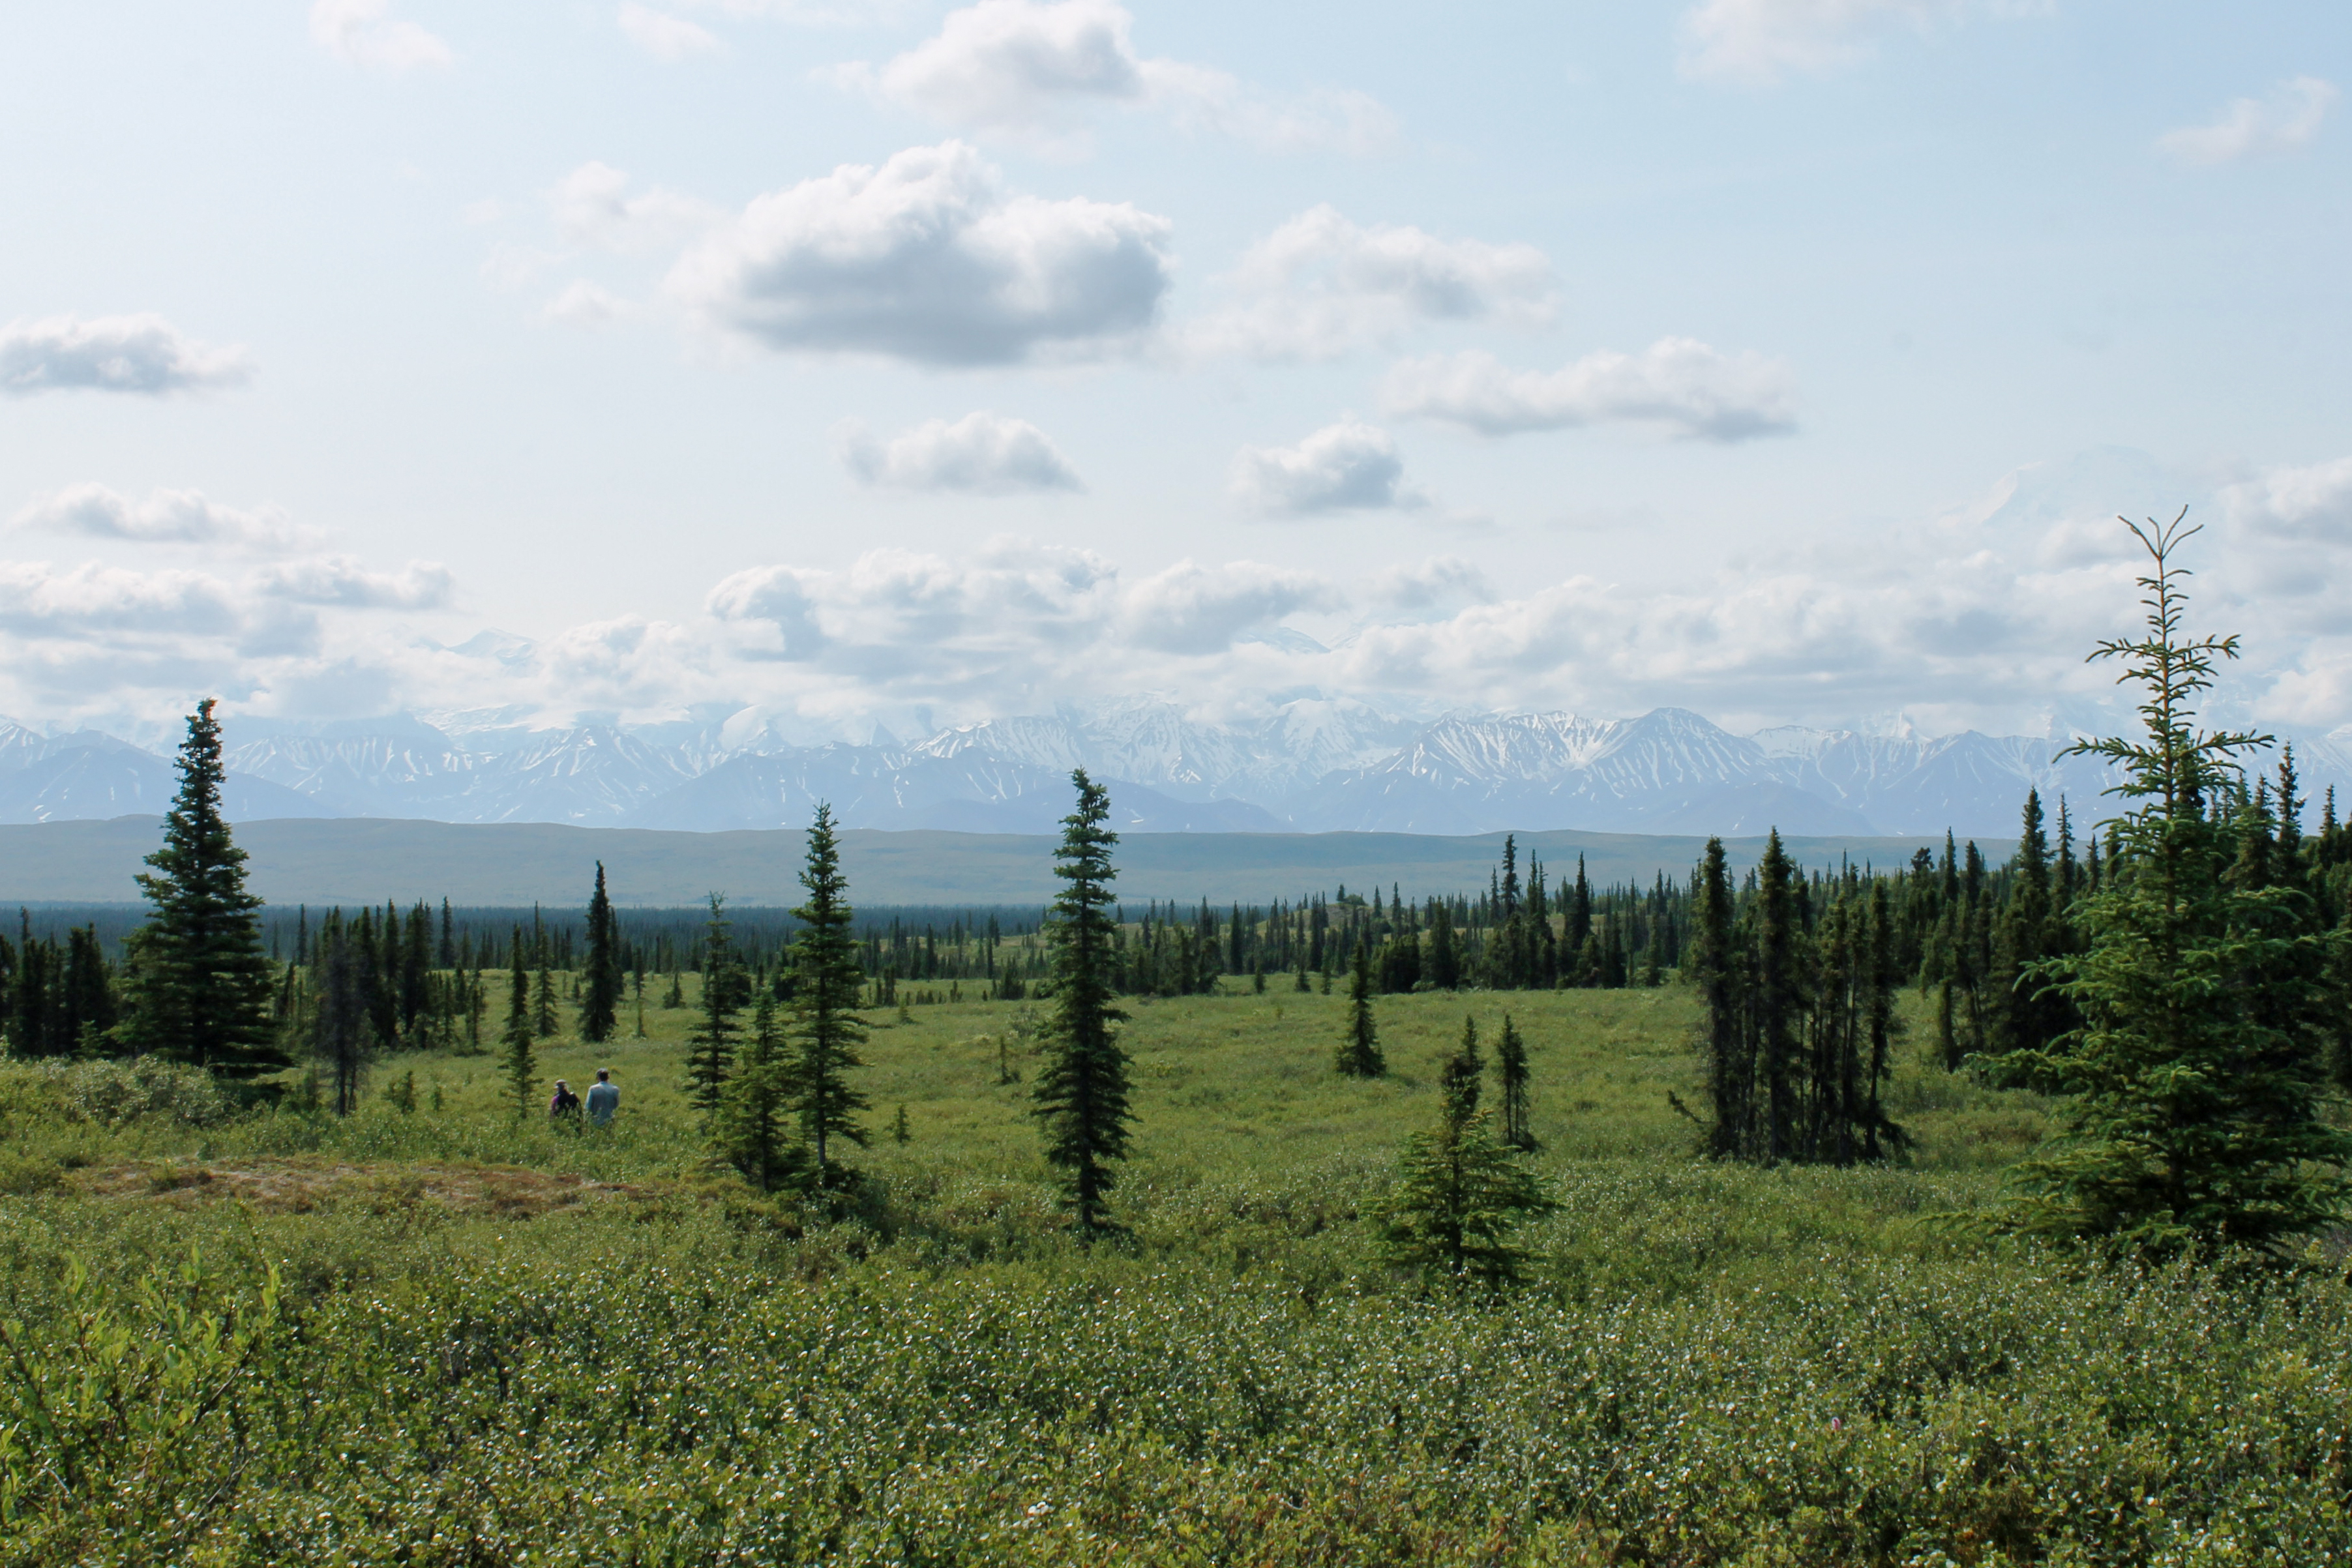 A view of the mountains in Denali National Park - Credit: Natalie Tongprasearth